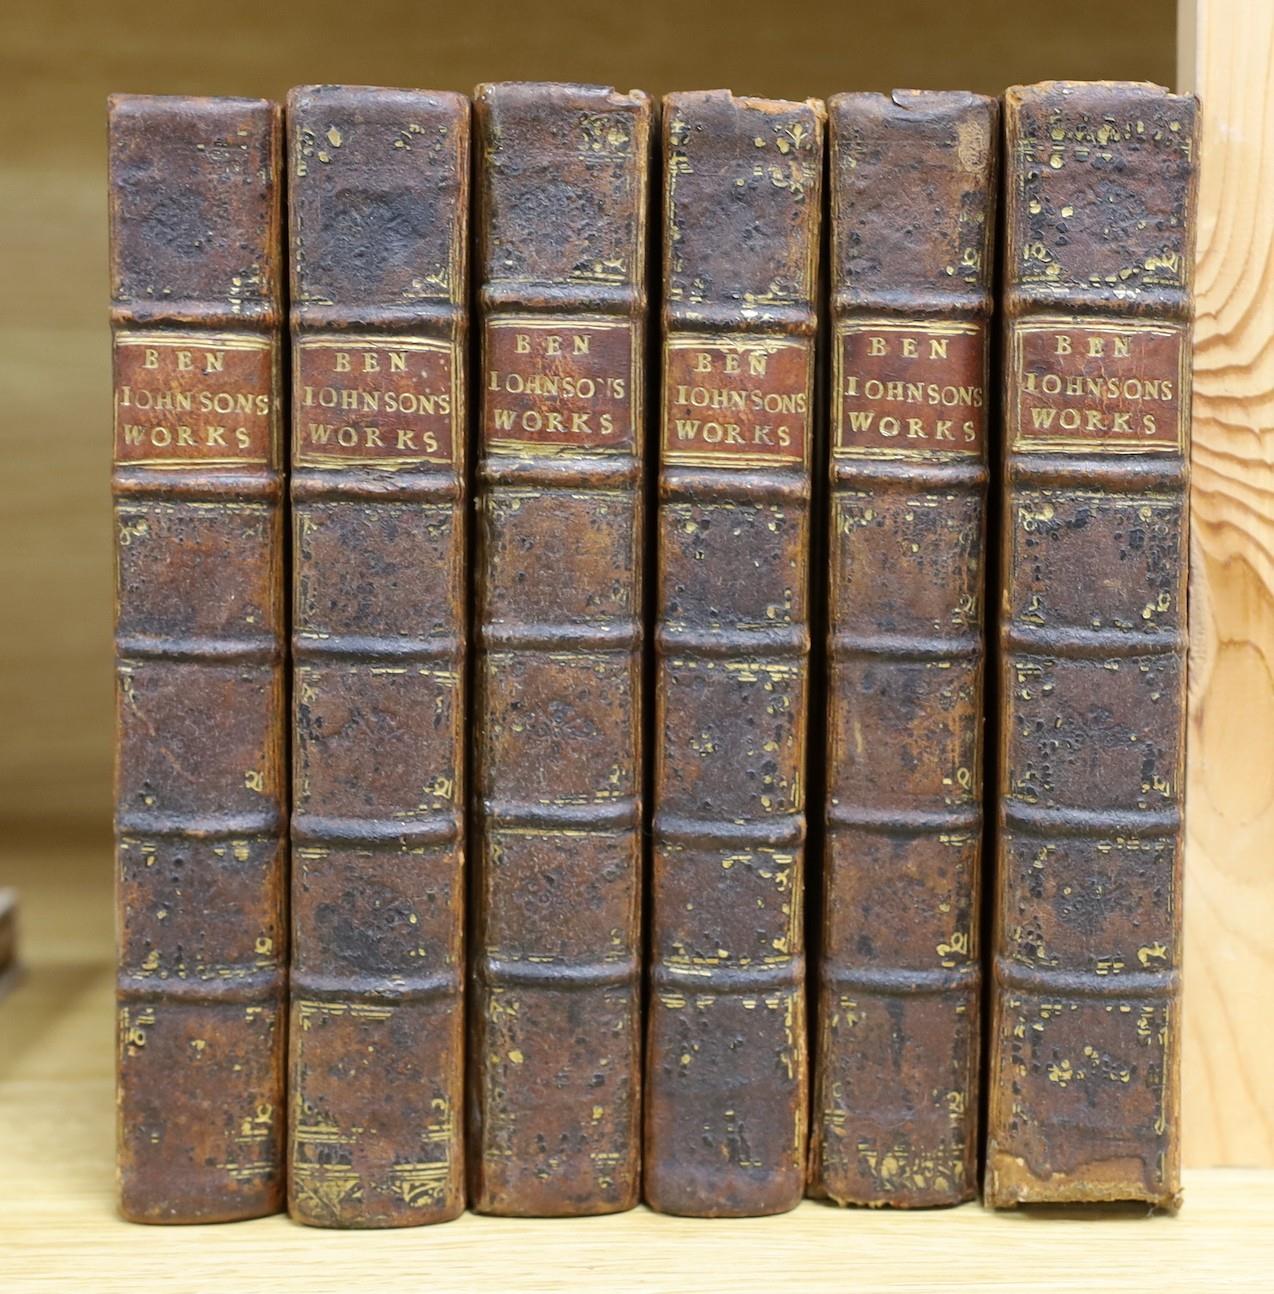 ° ° Johnson, Ben - The Works of Ben. Johnson, 6 vols, 8vo, blind panelled calf, with 12 engraved